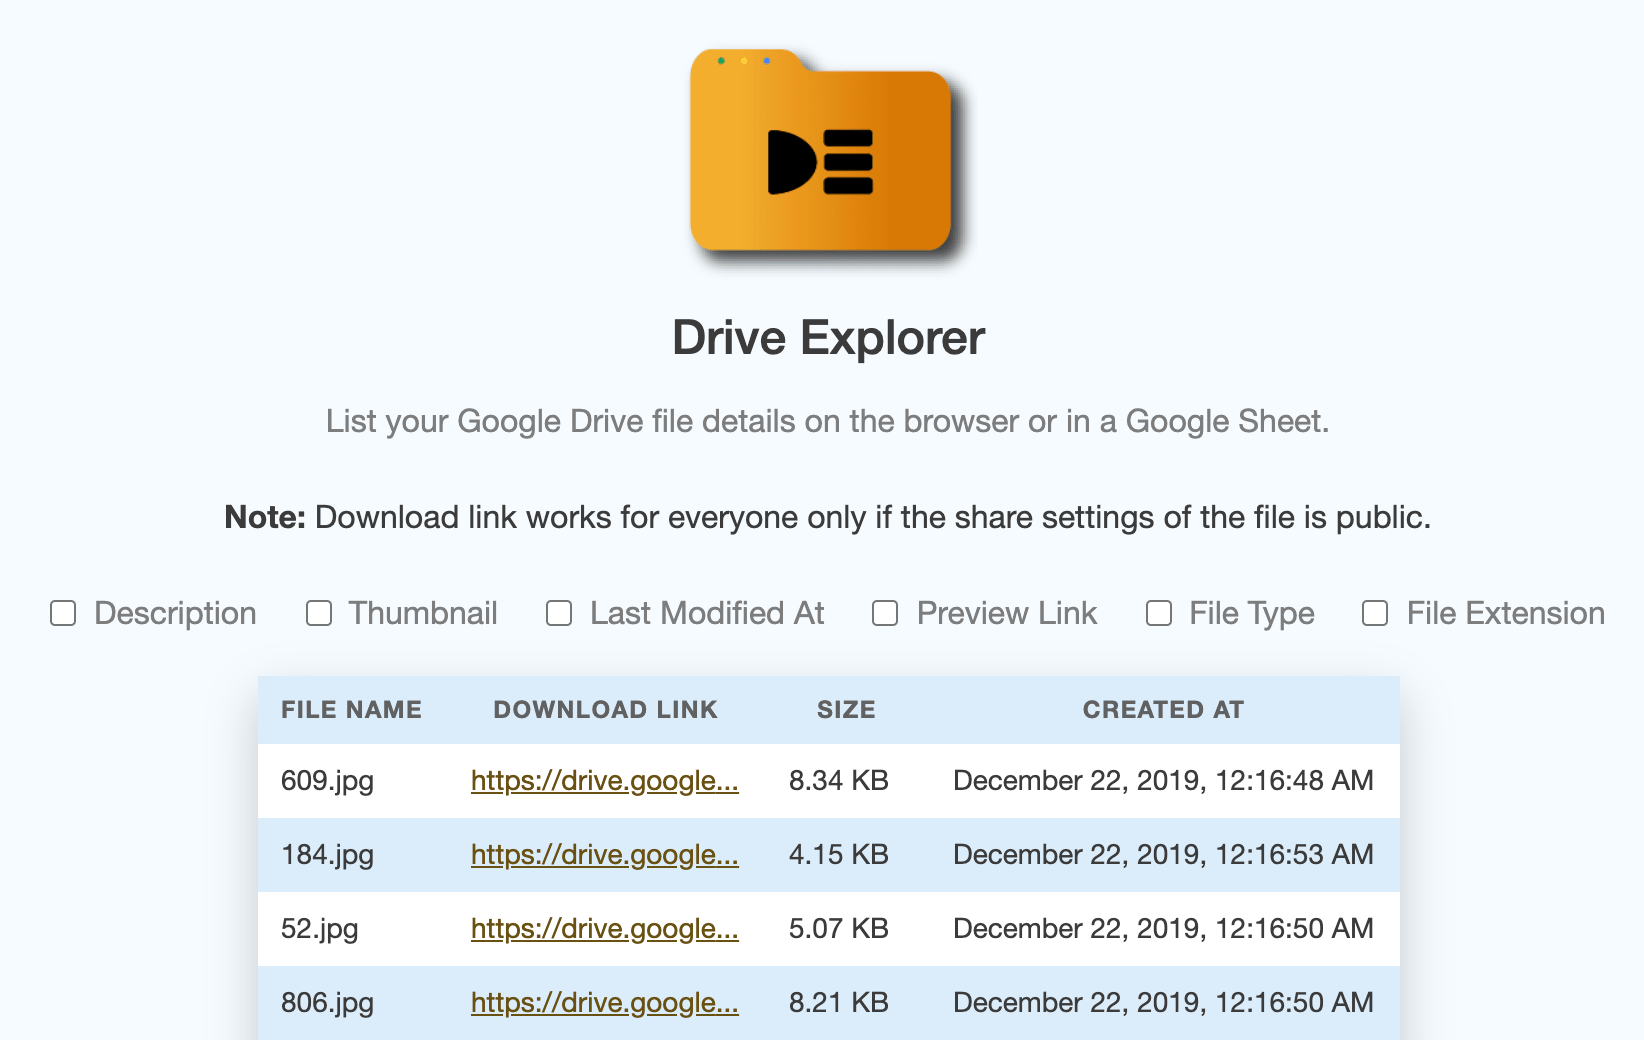 list of file details fetched by drive explorer